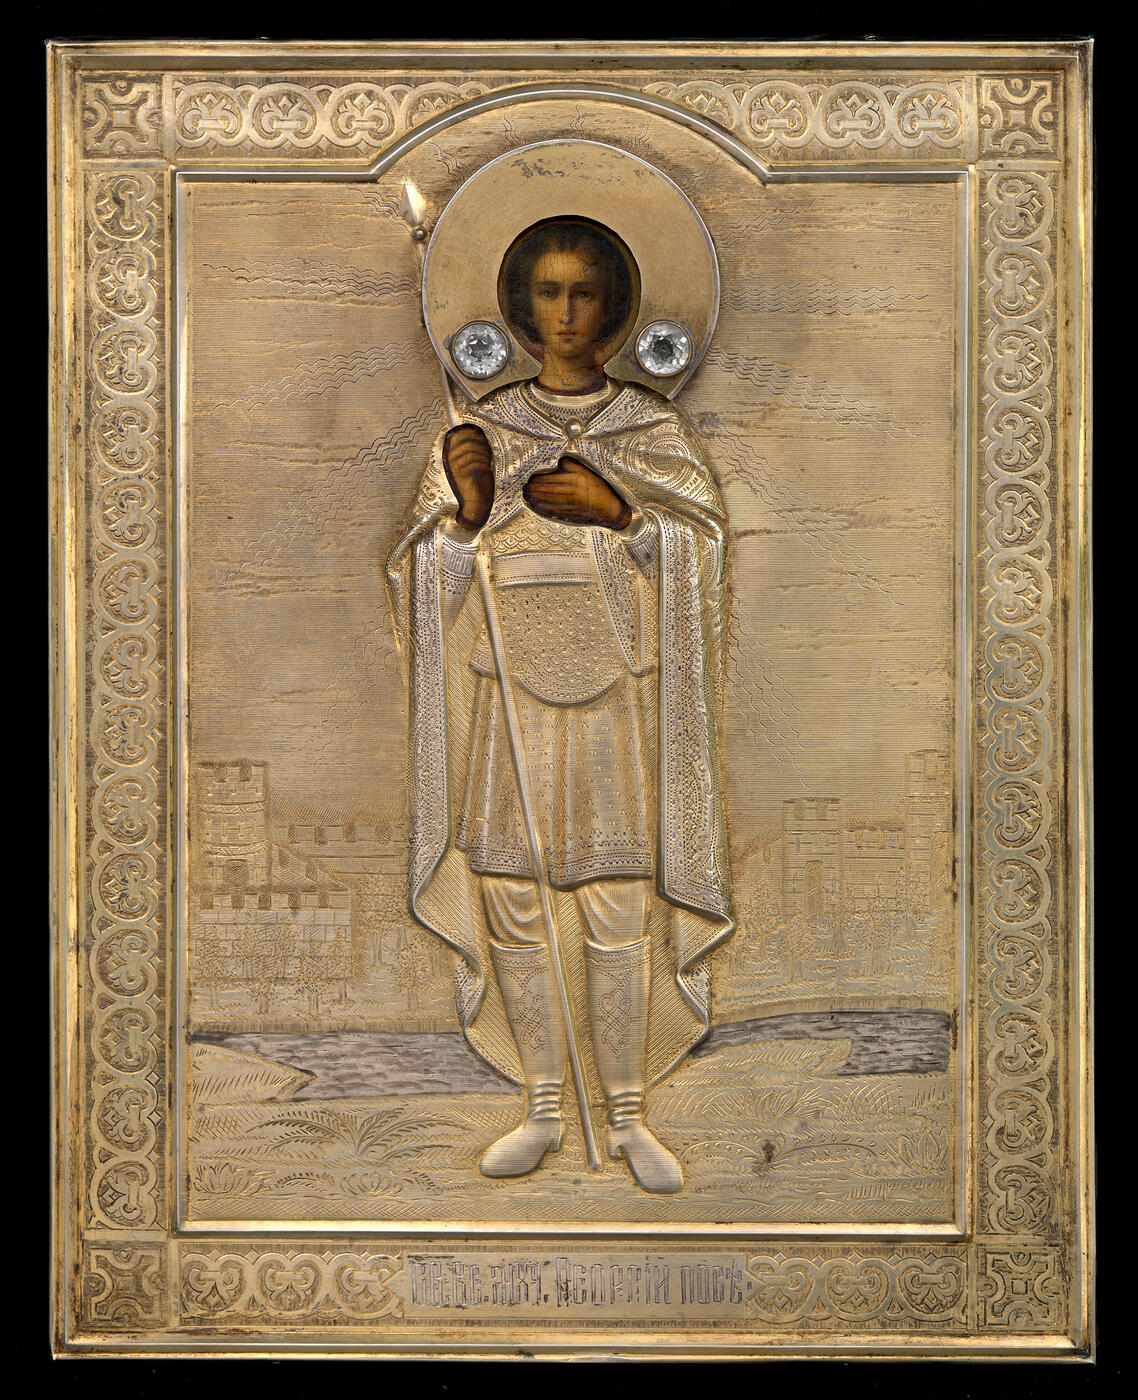 OIL ON PANEL, OKLAD WITH MAKER'S MARK I(?)E IN CYRILLIC, MOSCOW, 1899-1908, 84 STANDARD